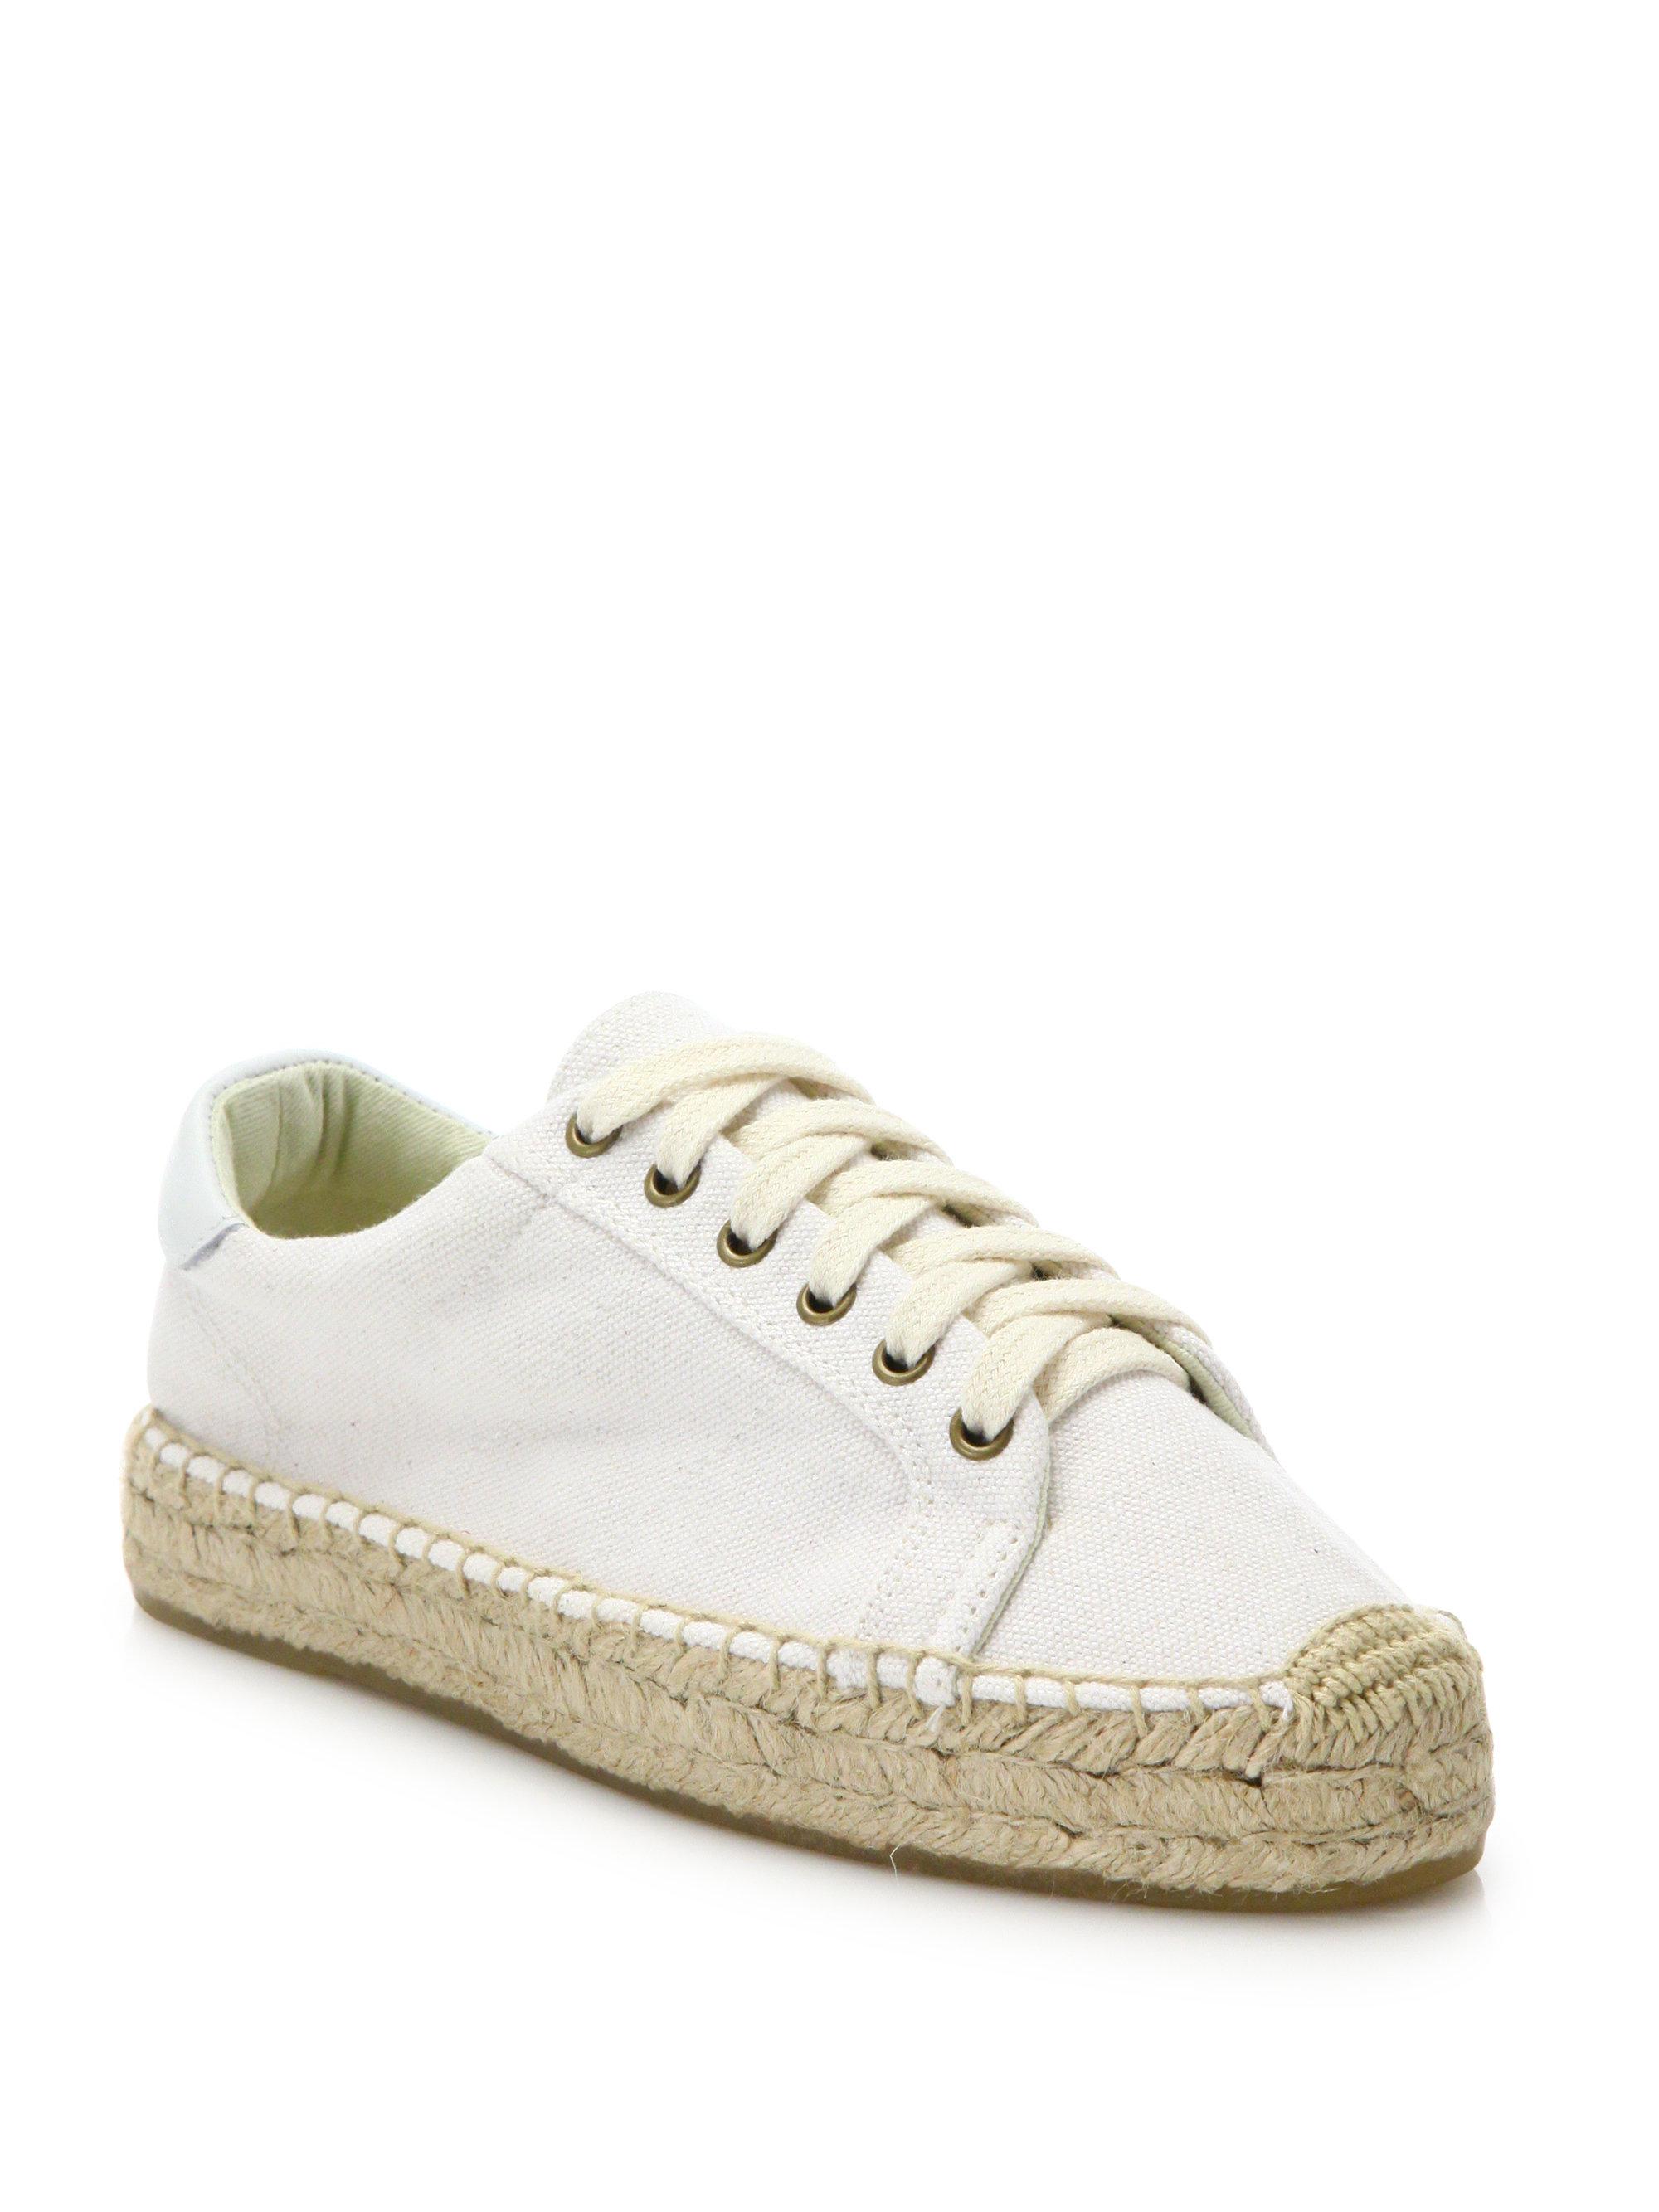 Soludos Canvas Espadrille Platform Sneakers in White | Lyst